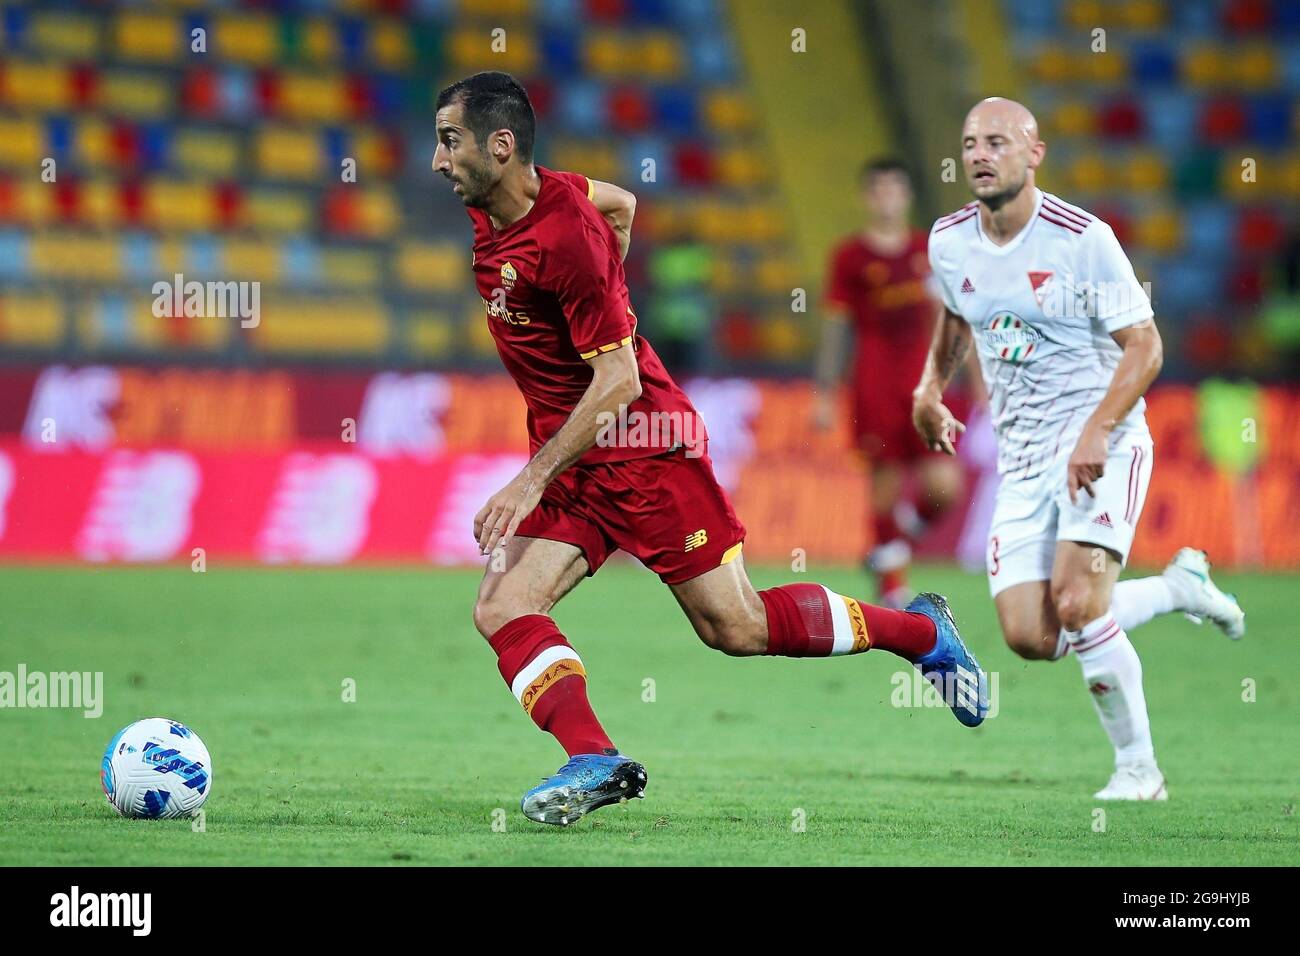 Henrikh Mkhitaryan of Roma (L) in action under pressure from Jozsef Varga of Debrecen (R) during the Friendly Pre-Season football match between AS Roma and Debrecen on July 25, 2021 at Stadio Benito Stirpe in Frosinone, Italy - Photo Federico Proietti / DPPI Stock Photo